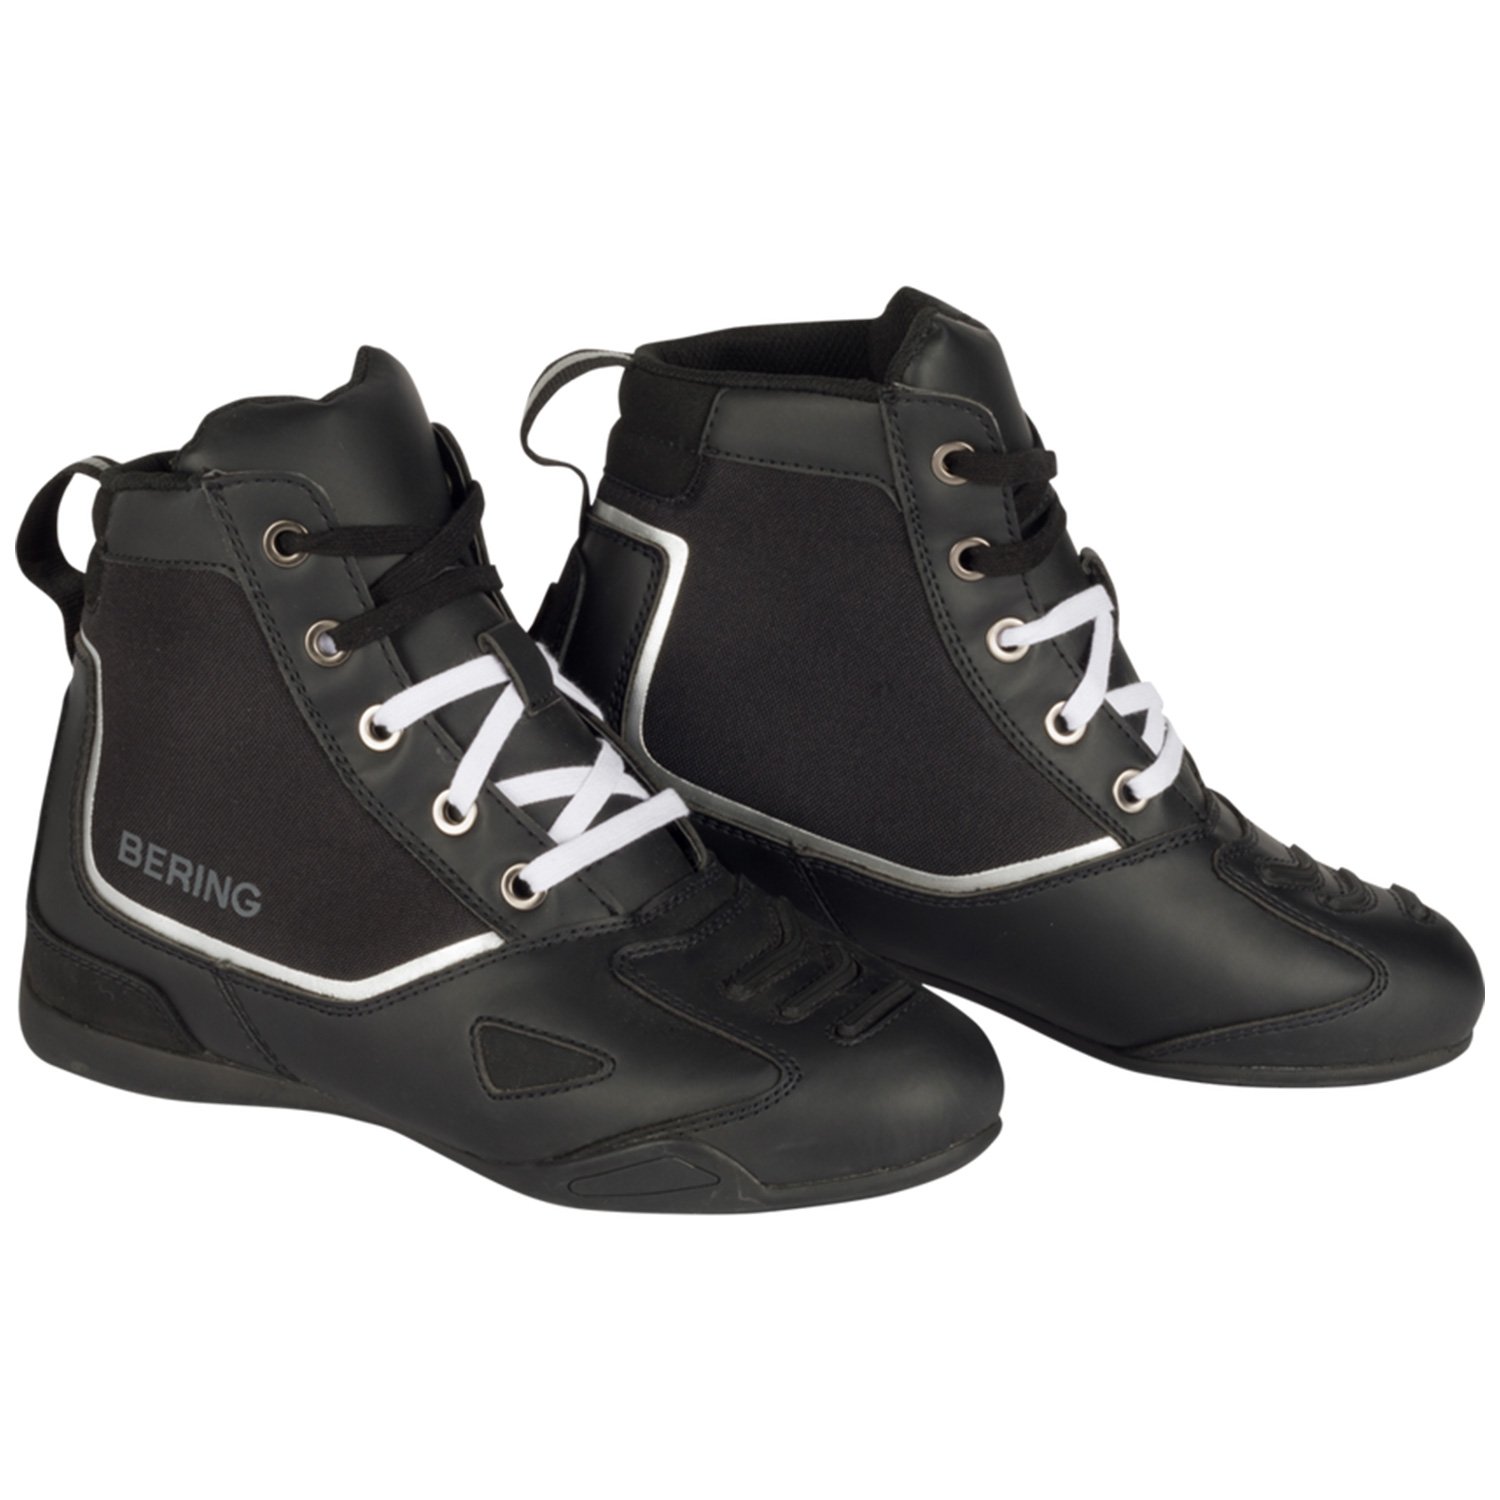 Image of Bering Active Shoes Black Size 42 ID 3660815184226